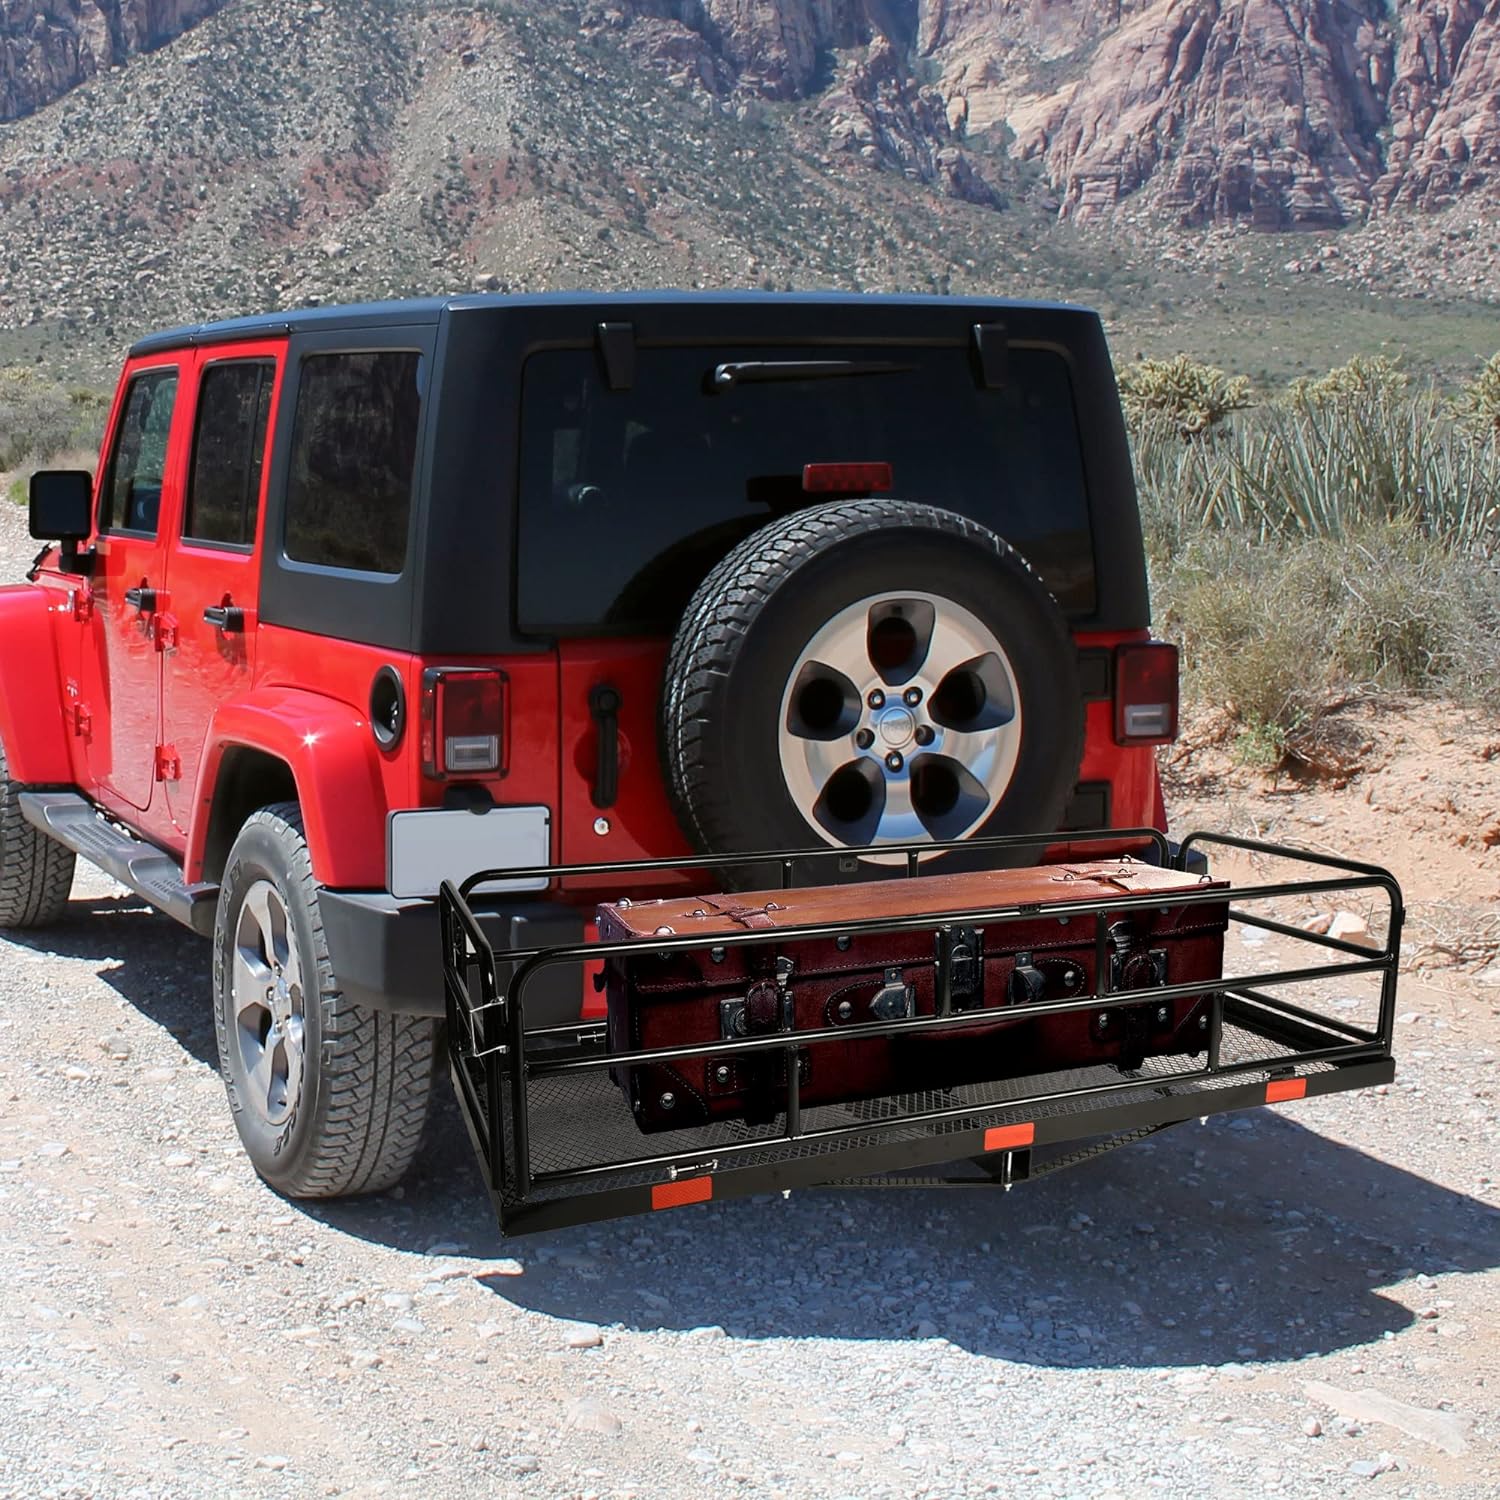 60" X 24" X 14" Folding Hitch Mount Cargo Carrier, 500 lbs Capacity